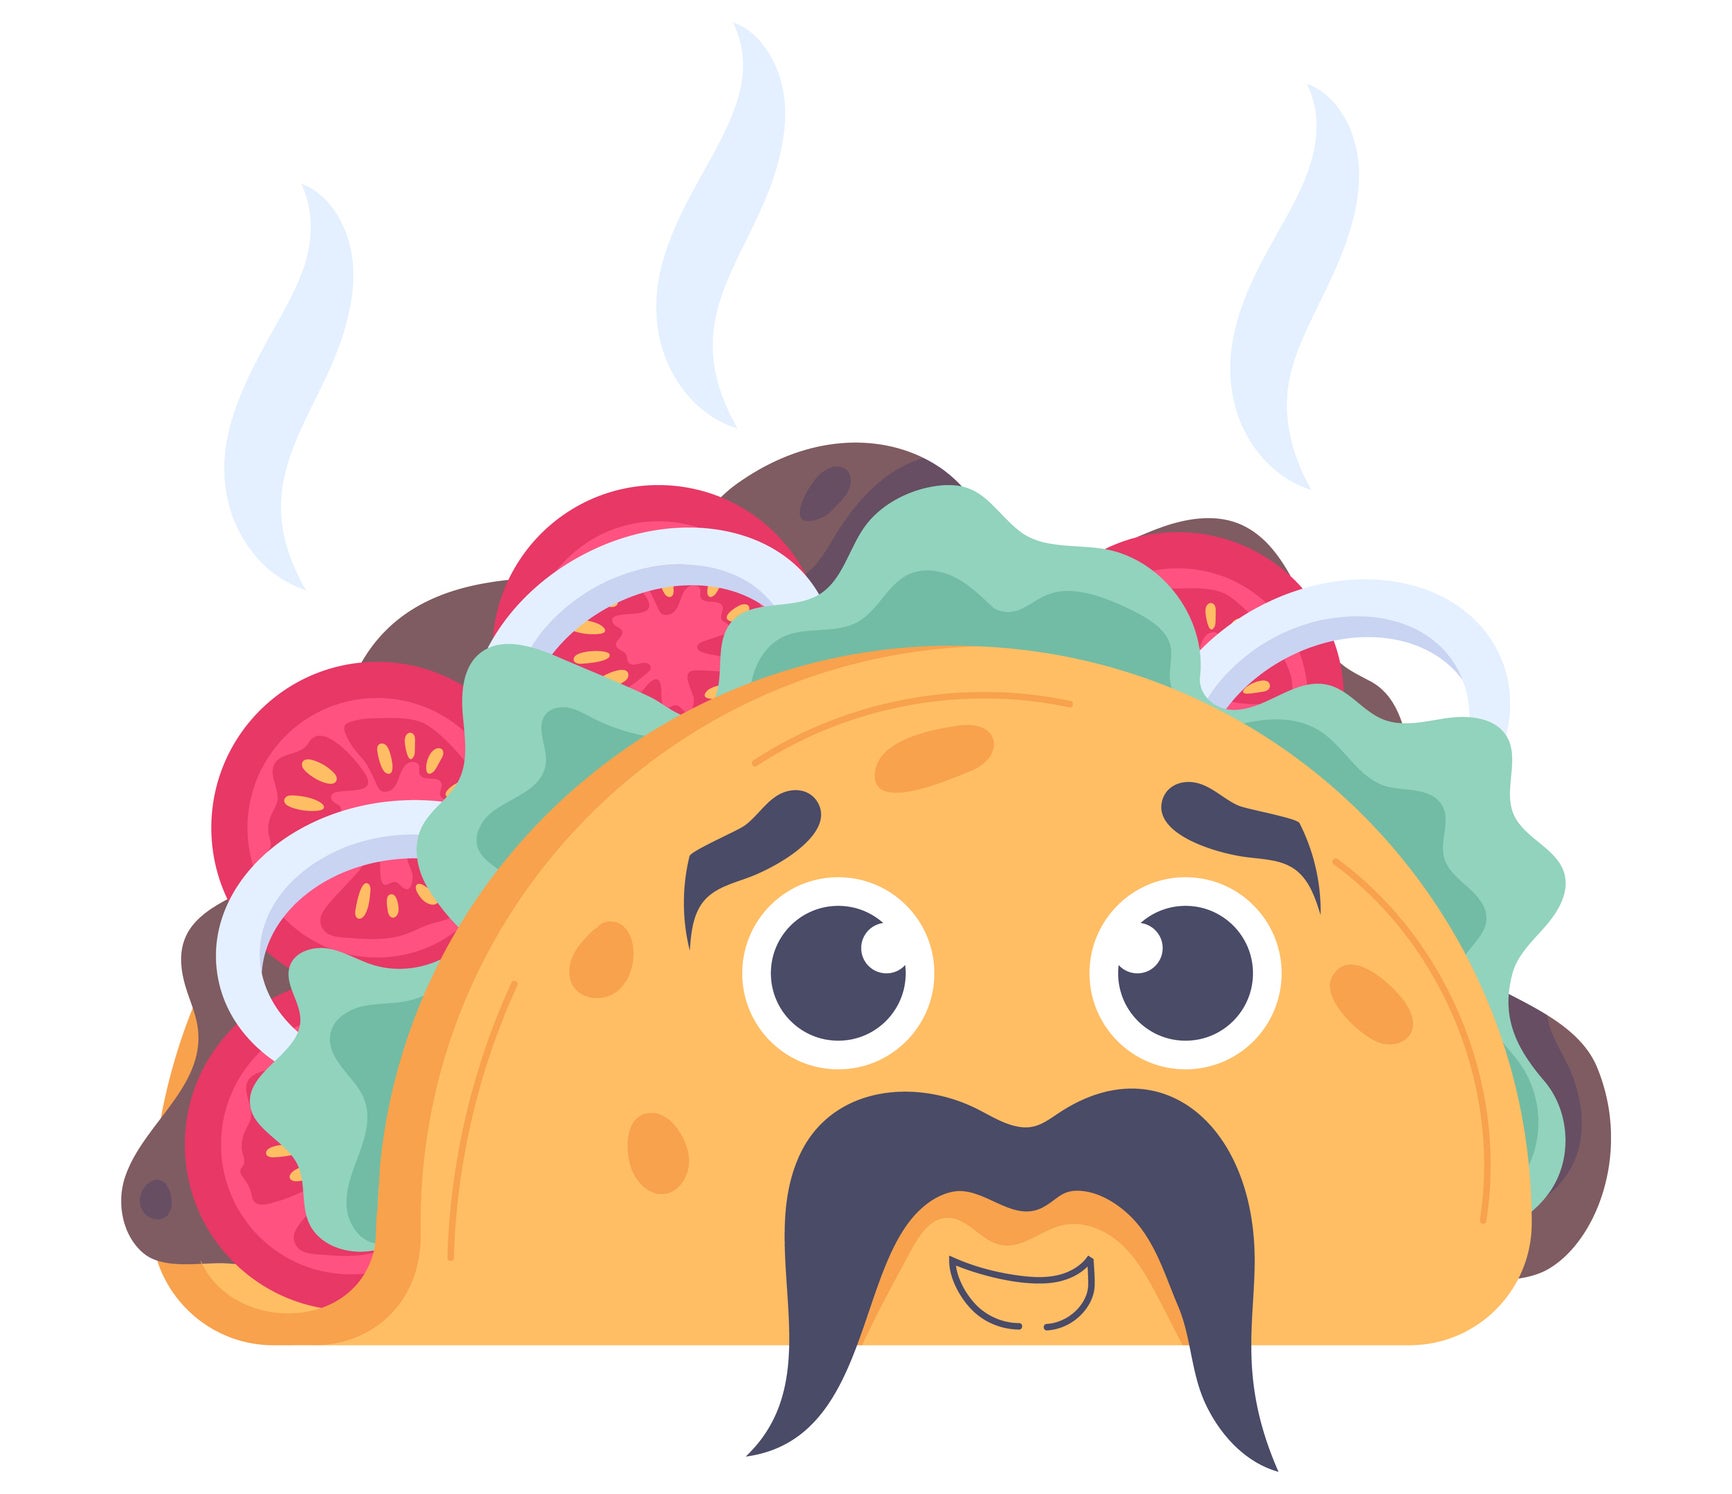 Cartoon taco with a mustache, wide eyes, and a slight smile. The taco is filled with lettuce, tomatoes, and onions, with steam rising from it